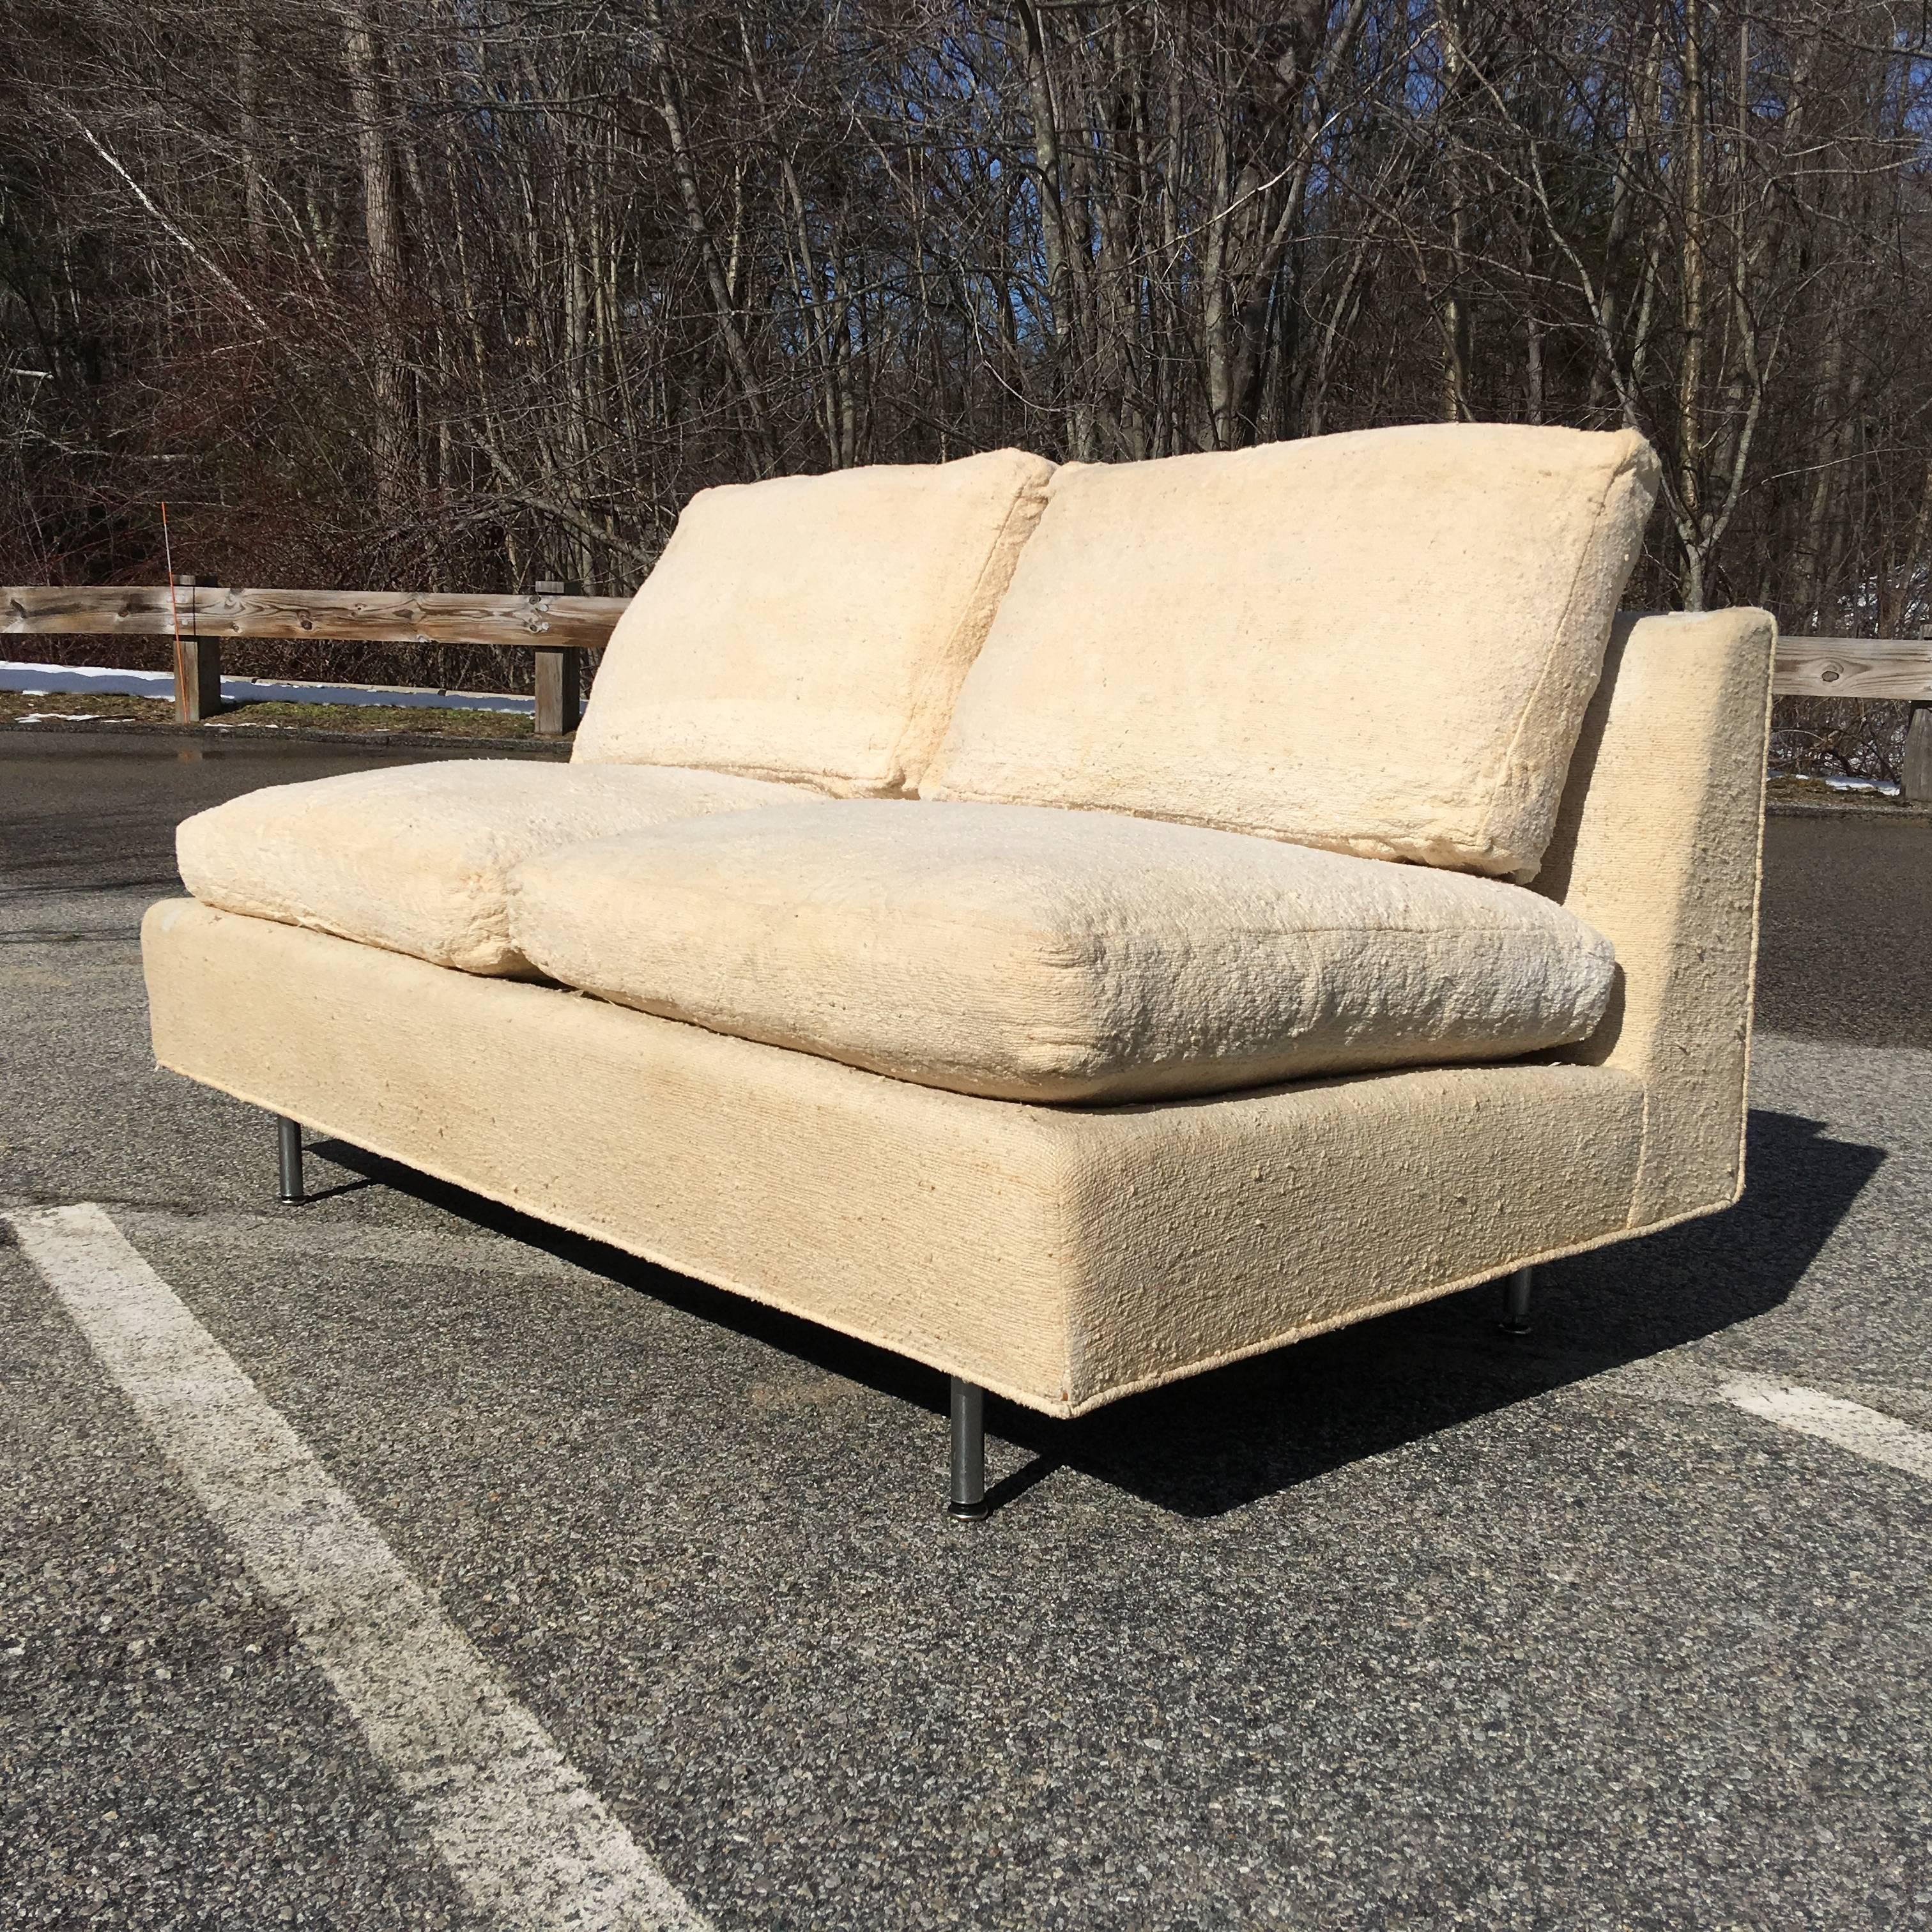 SATURDAY SALE (2/18)

Mid-1960's loveseat slipper sofa with stainless steel tubular legs and foot glides.  Cushion inserts are down filled.  Upholstery is original Haitian cotton with significant wear and discoloration.  Designed by architect Ben